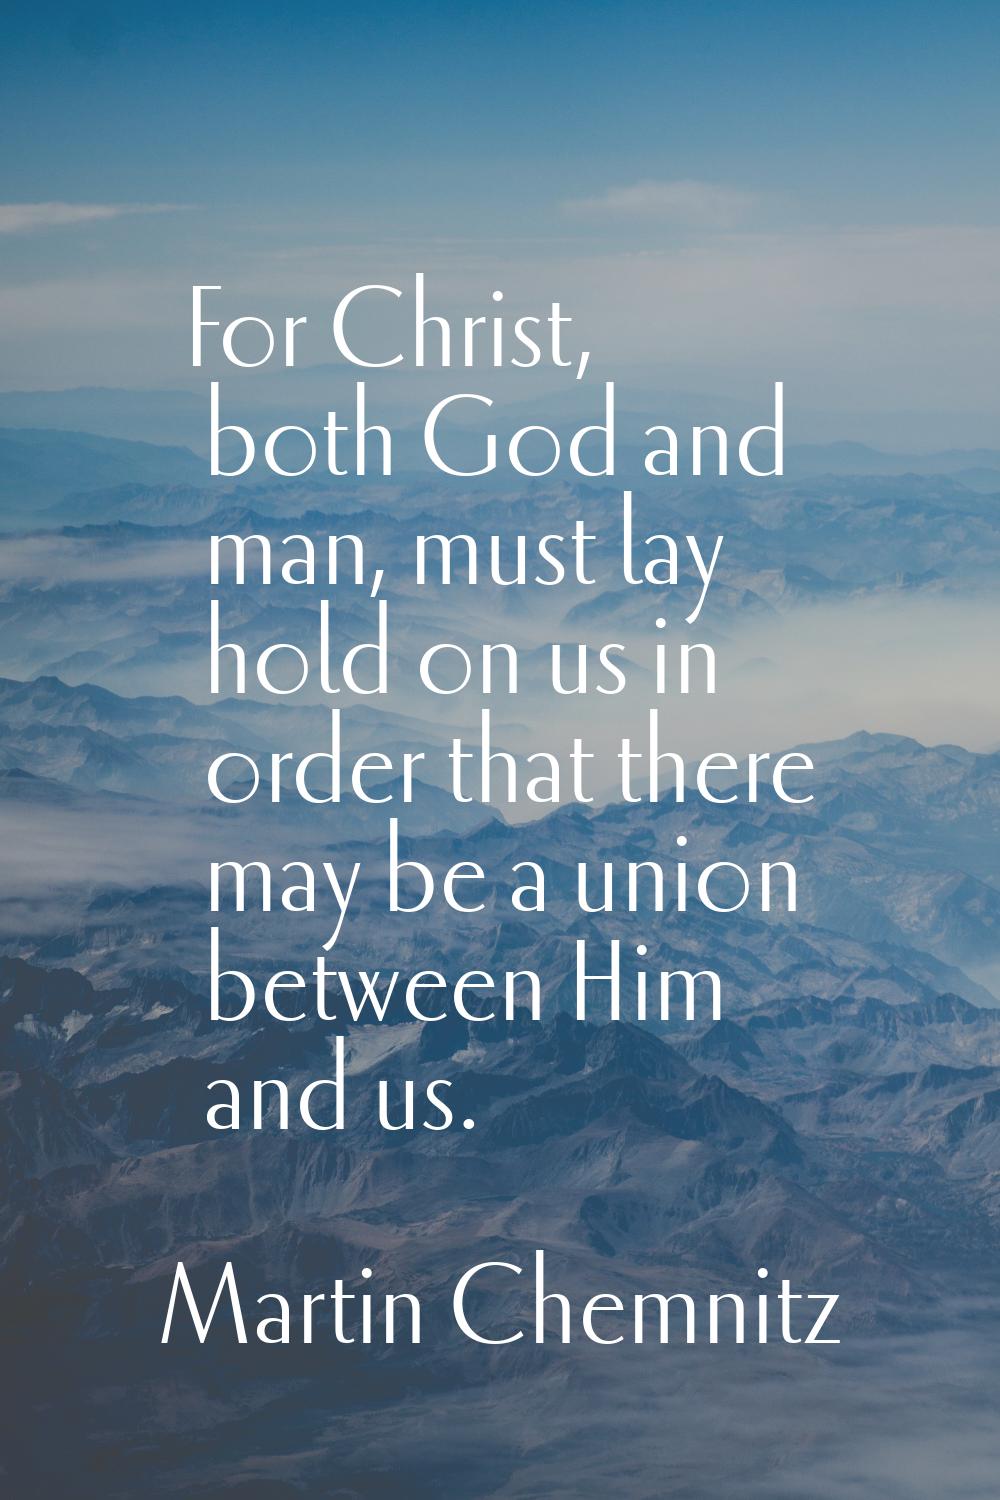 For Christ, both God and man, must lay hold on us in order that there may be a union between Him an